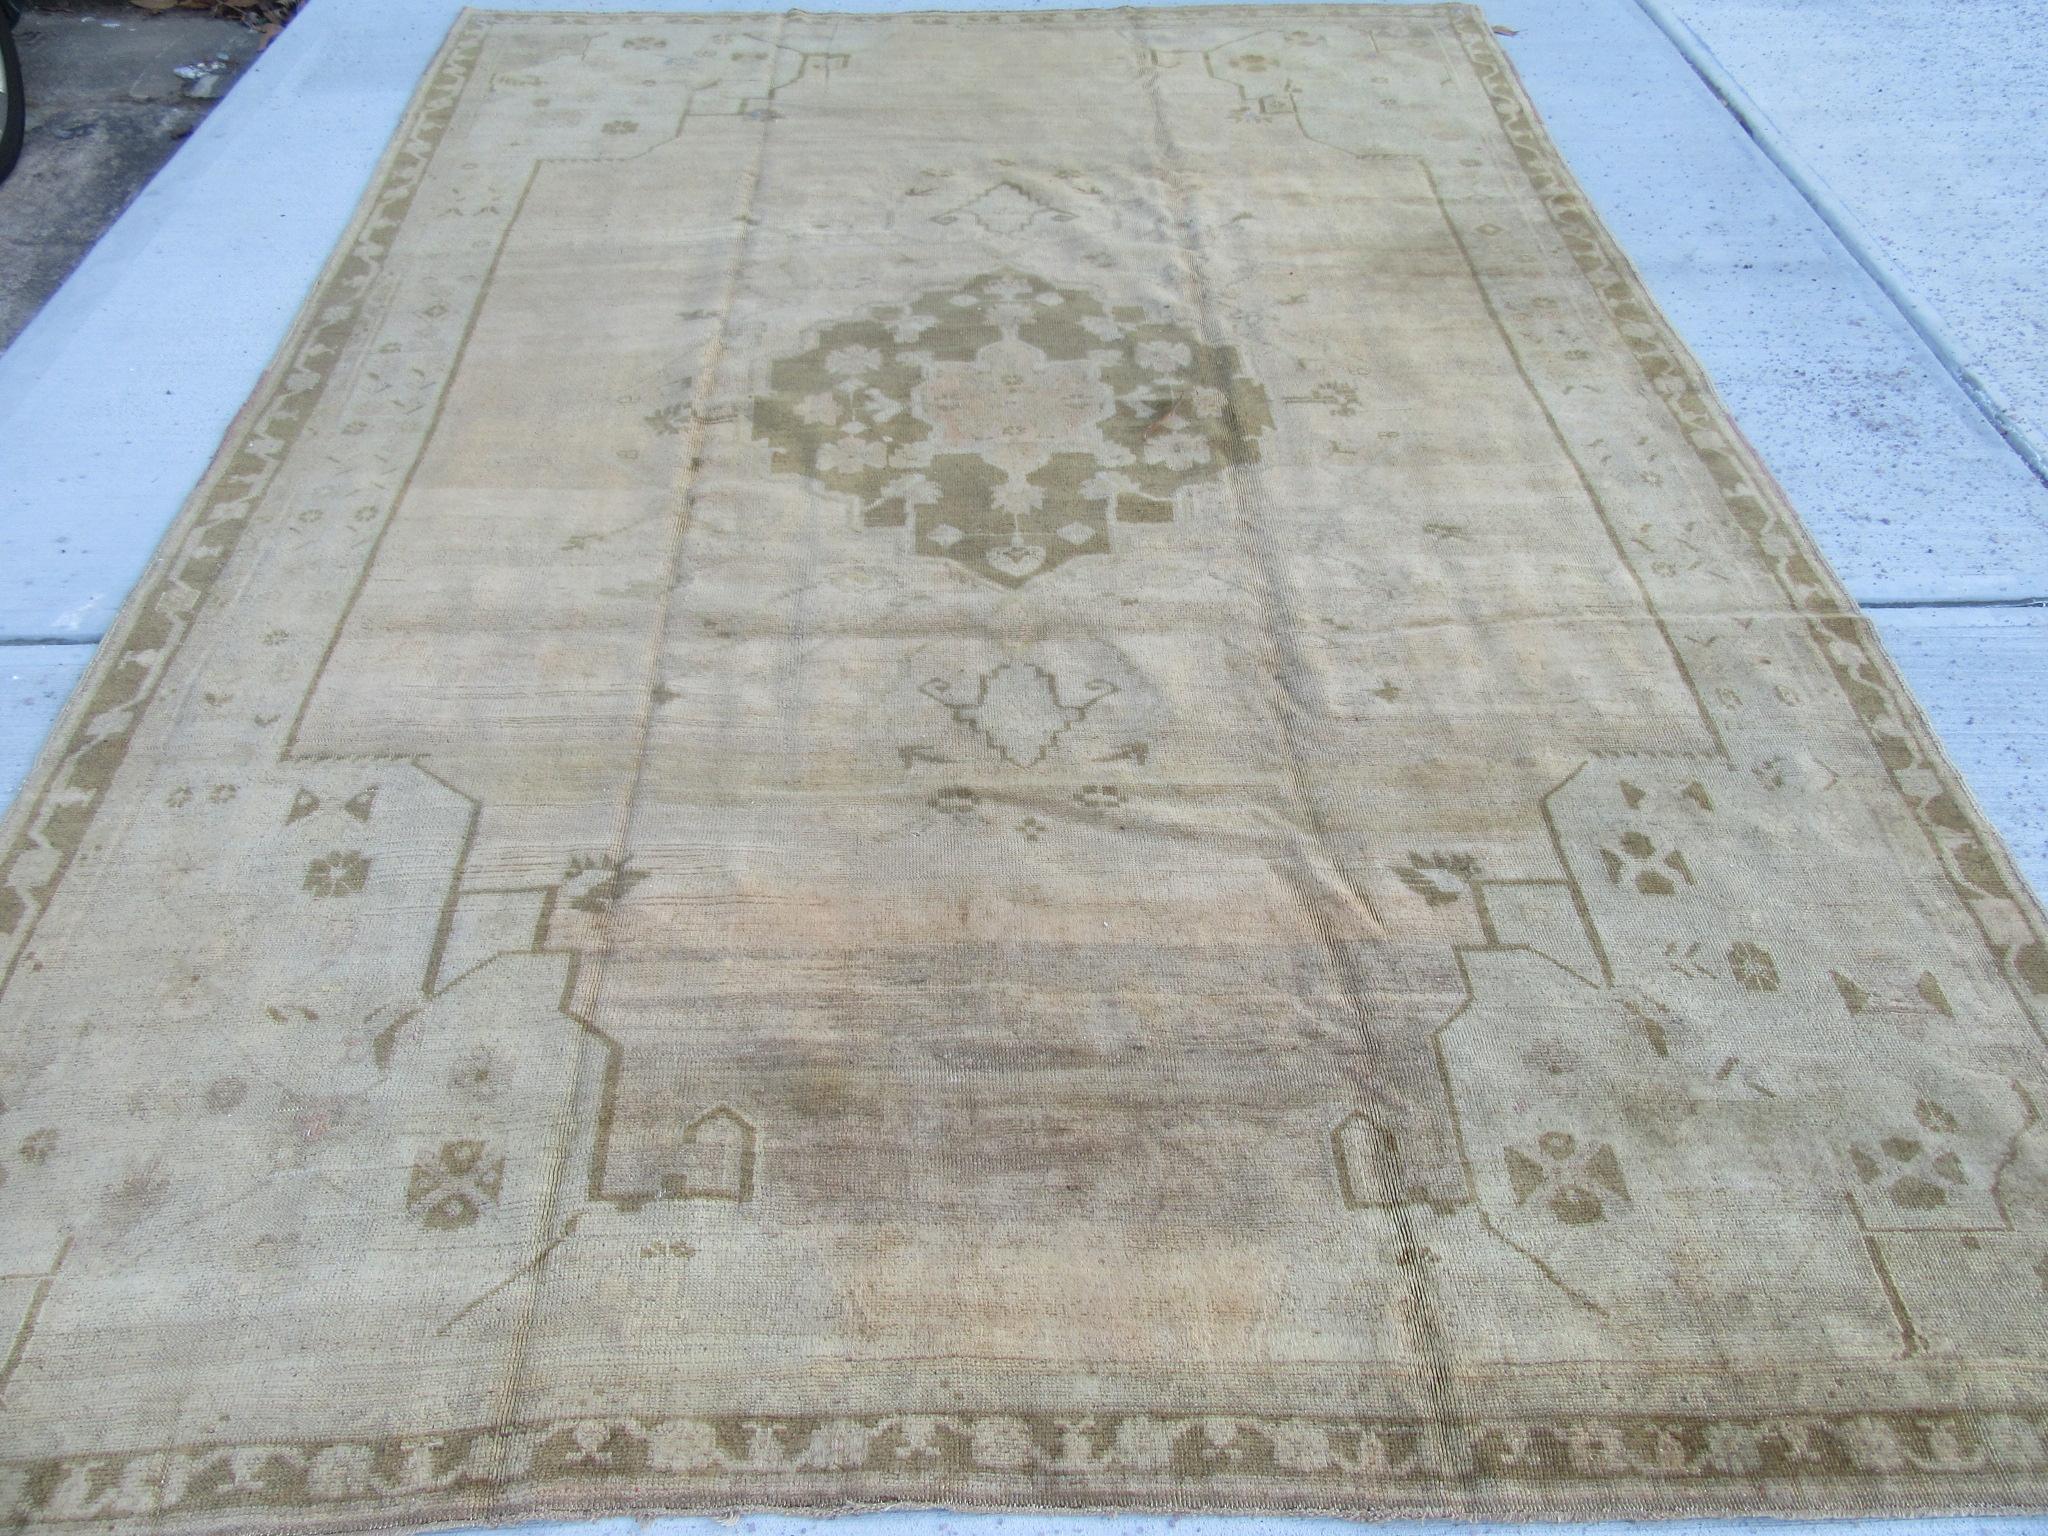 This is a beautiful and finely knotted room size vintage Turkish Kars rug antique washed for softer colors. The rug measures 8' x 11' 6'' and is in great condition.